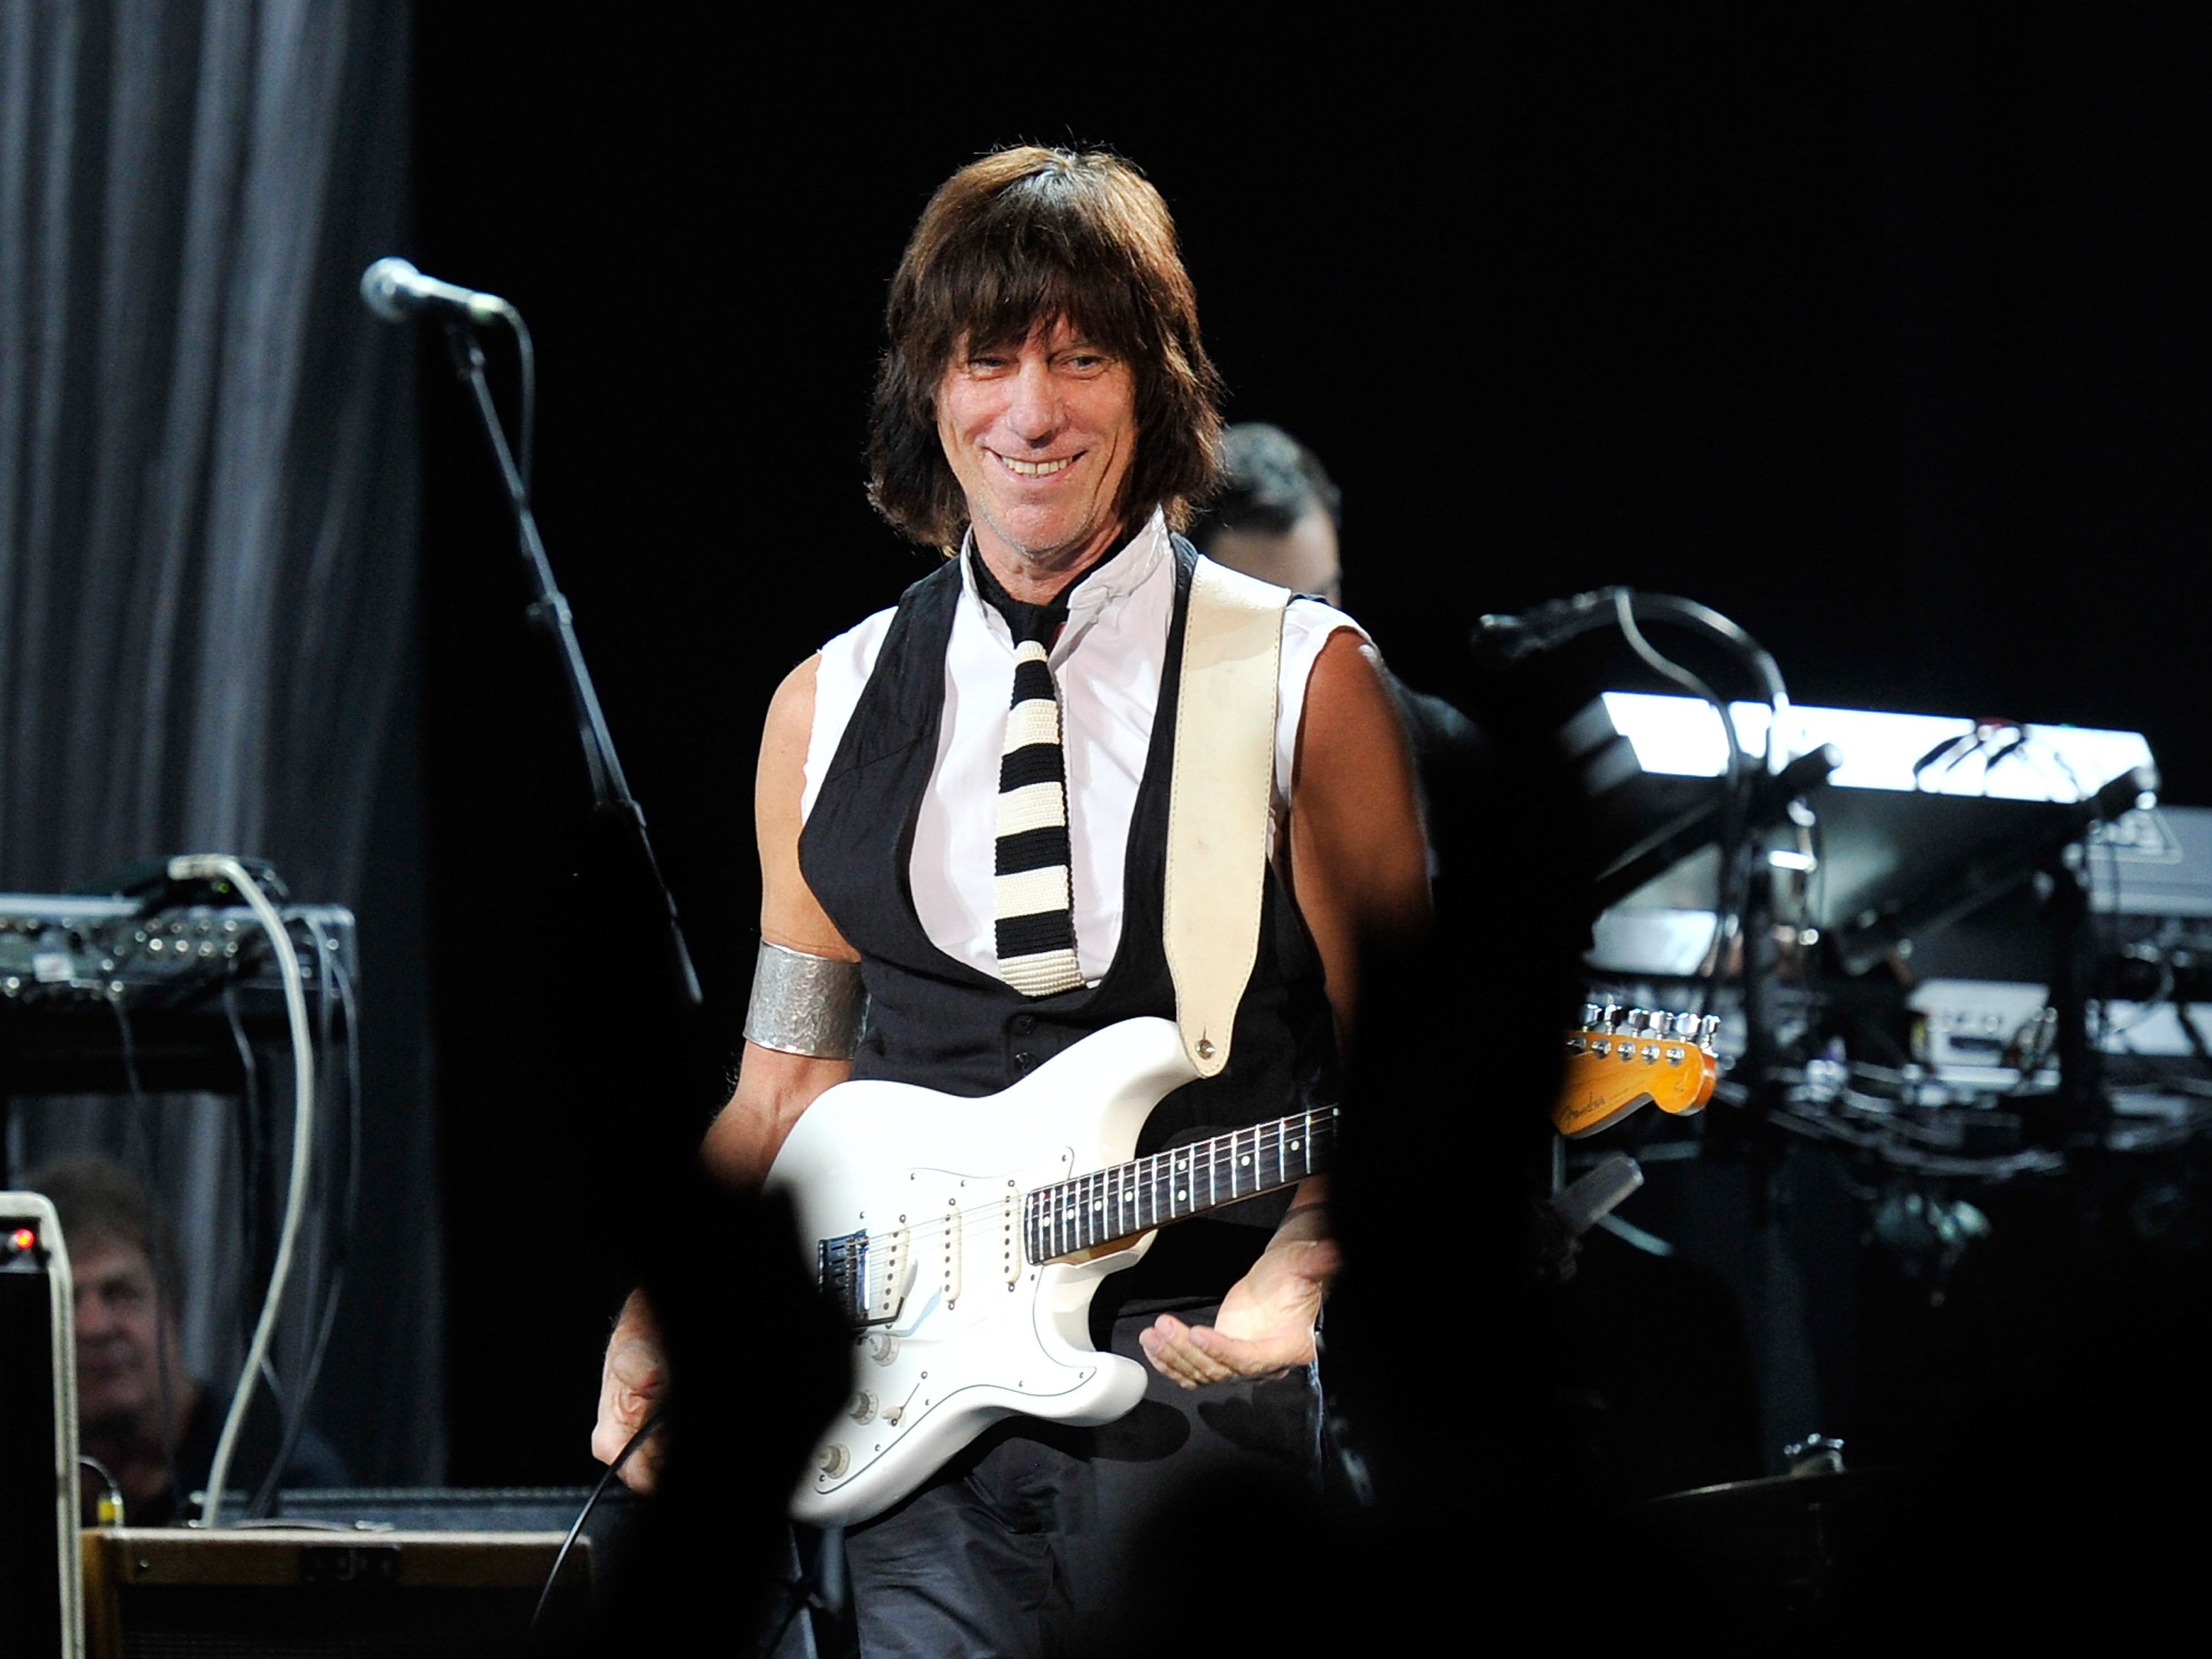 Jeff Beck, widely regarded as one of the most influential rock guitarists of all time, died on 10 January